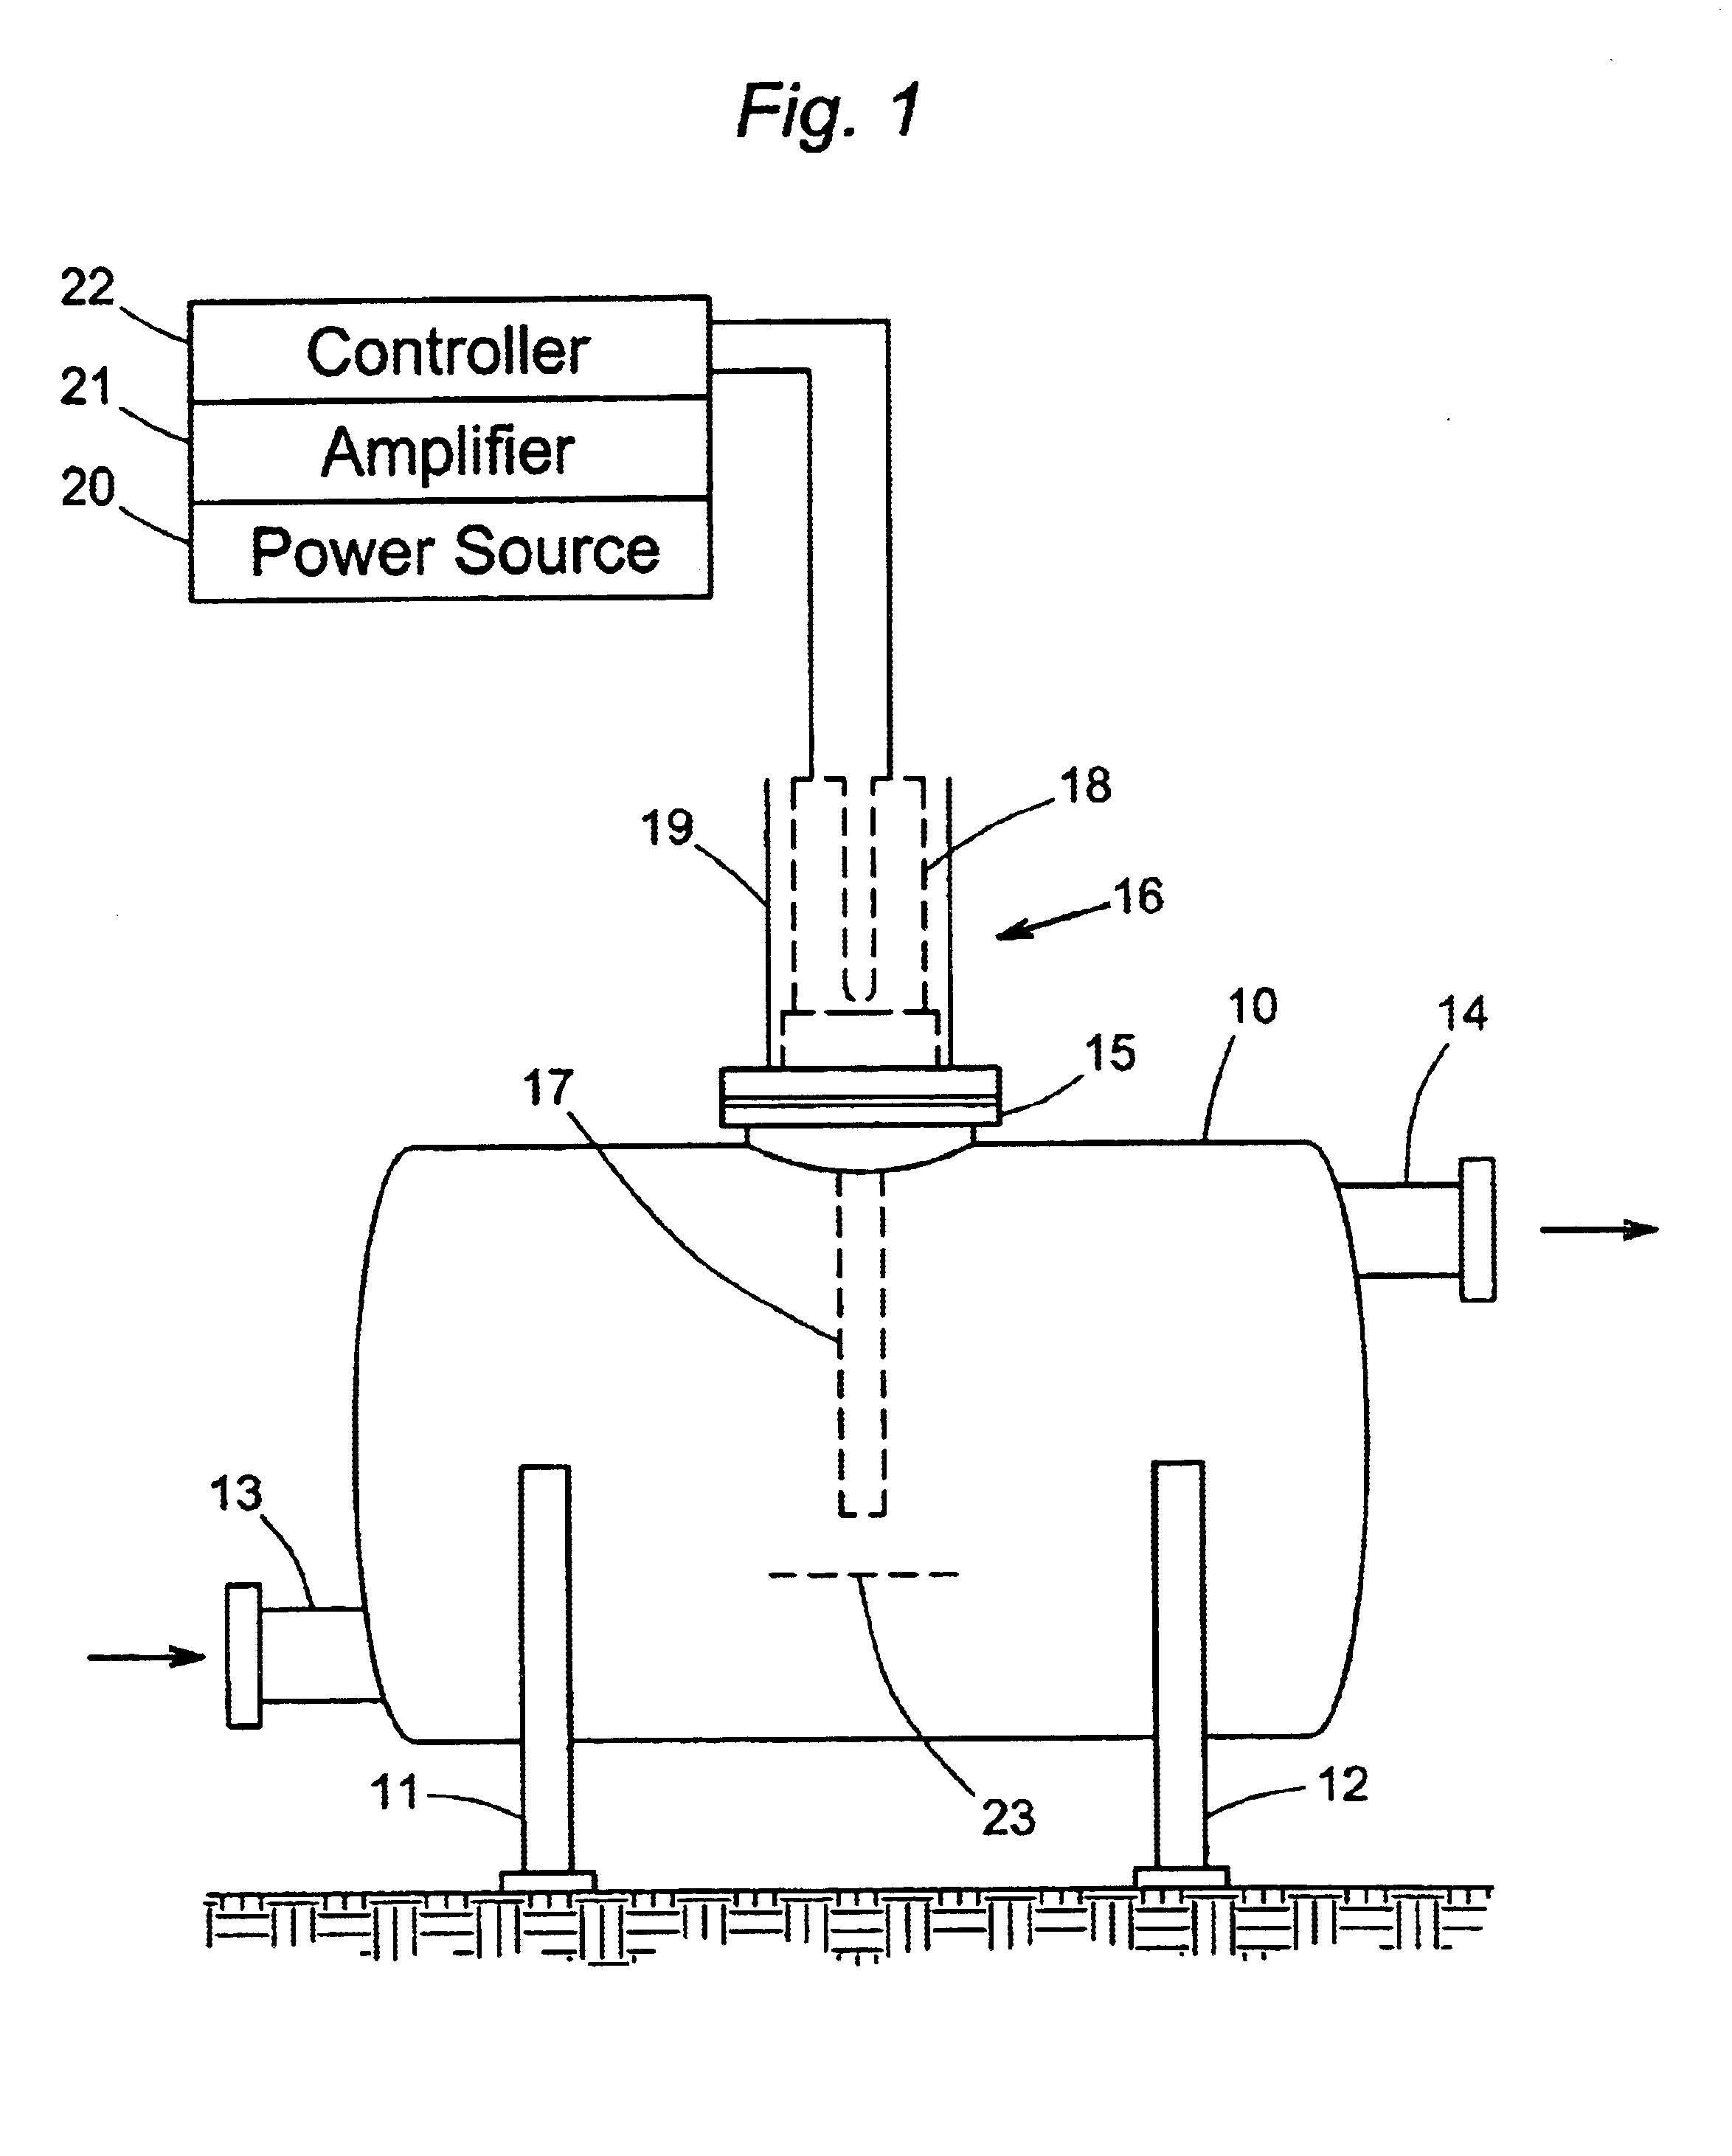 High-power ultrasound generator and use in chemical reactions